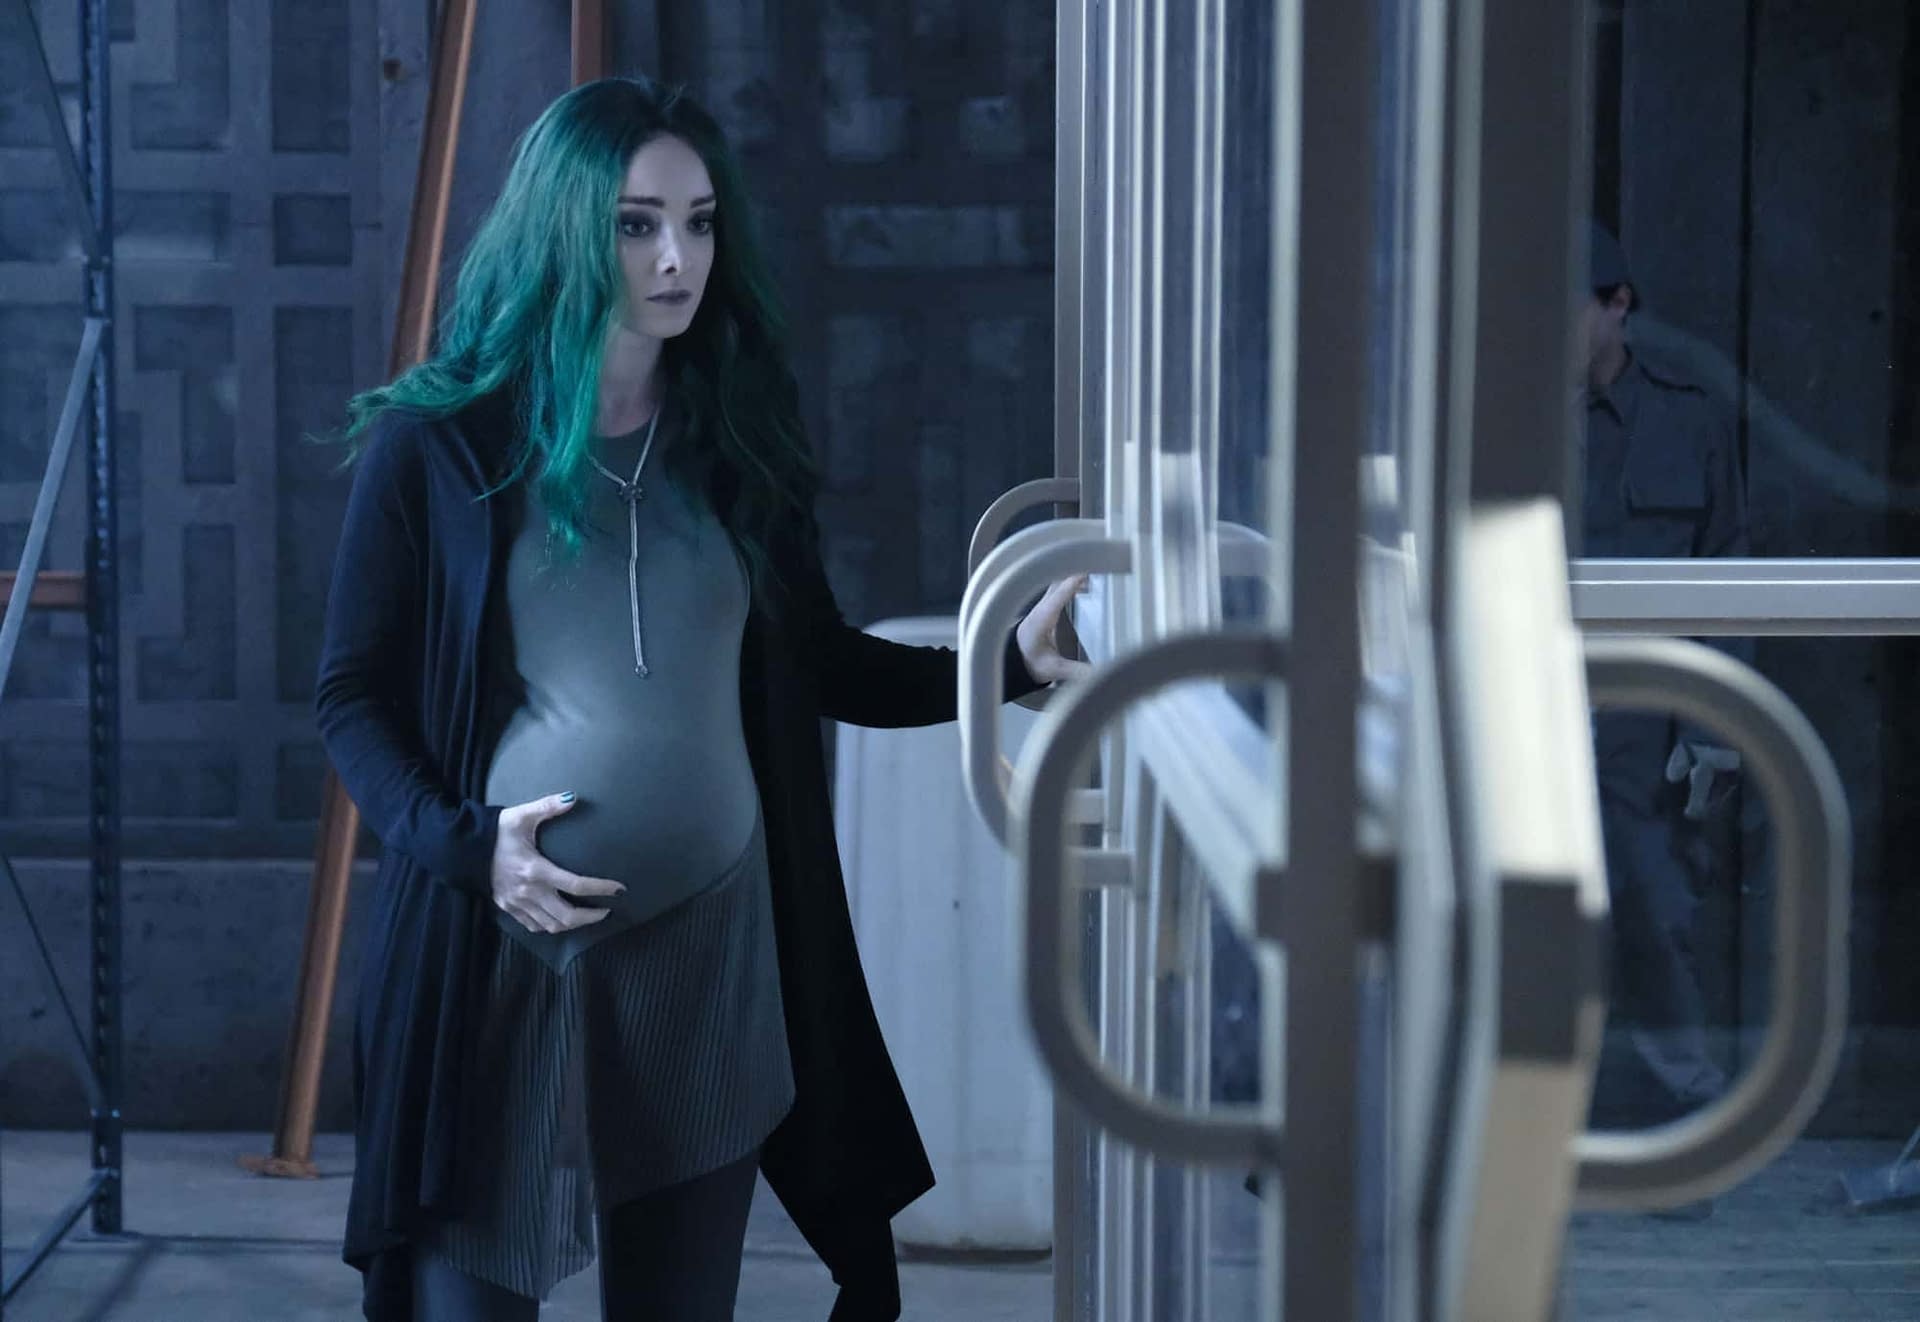 The Gifted Season 2: Emma Dumont Talks Lorna's Pregnancy, Mental Illness and Playing a Very Different Character